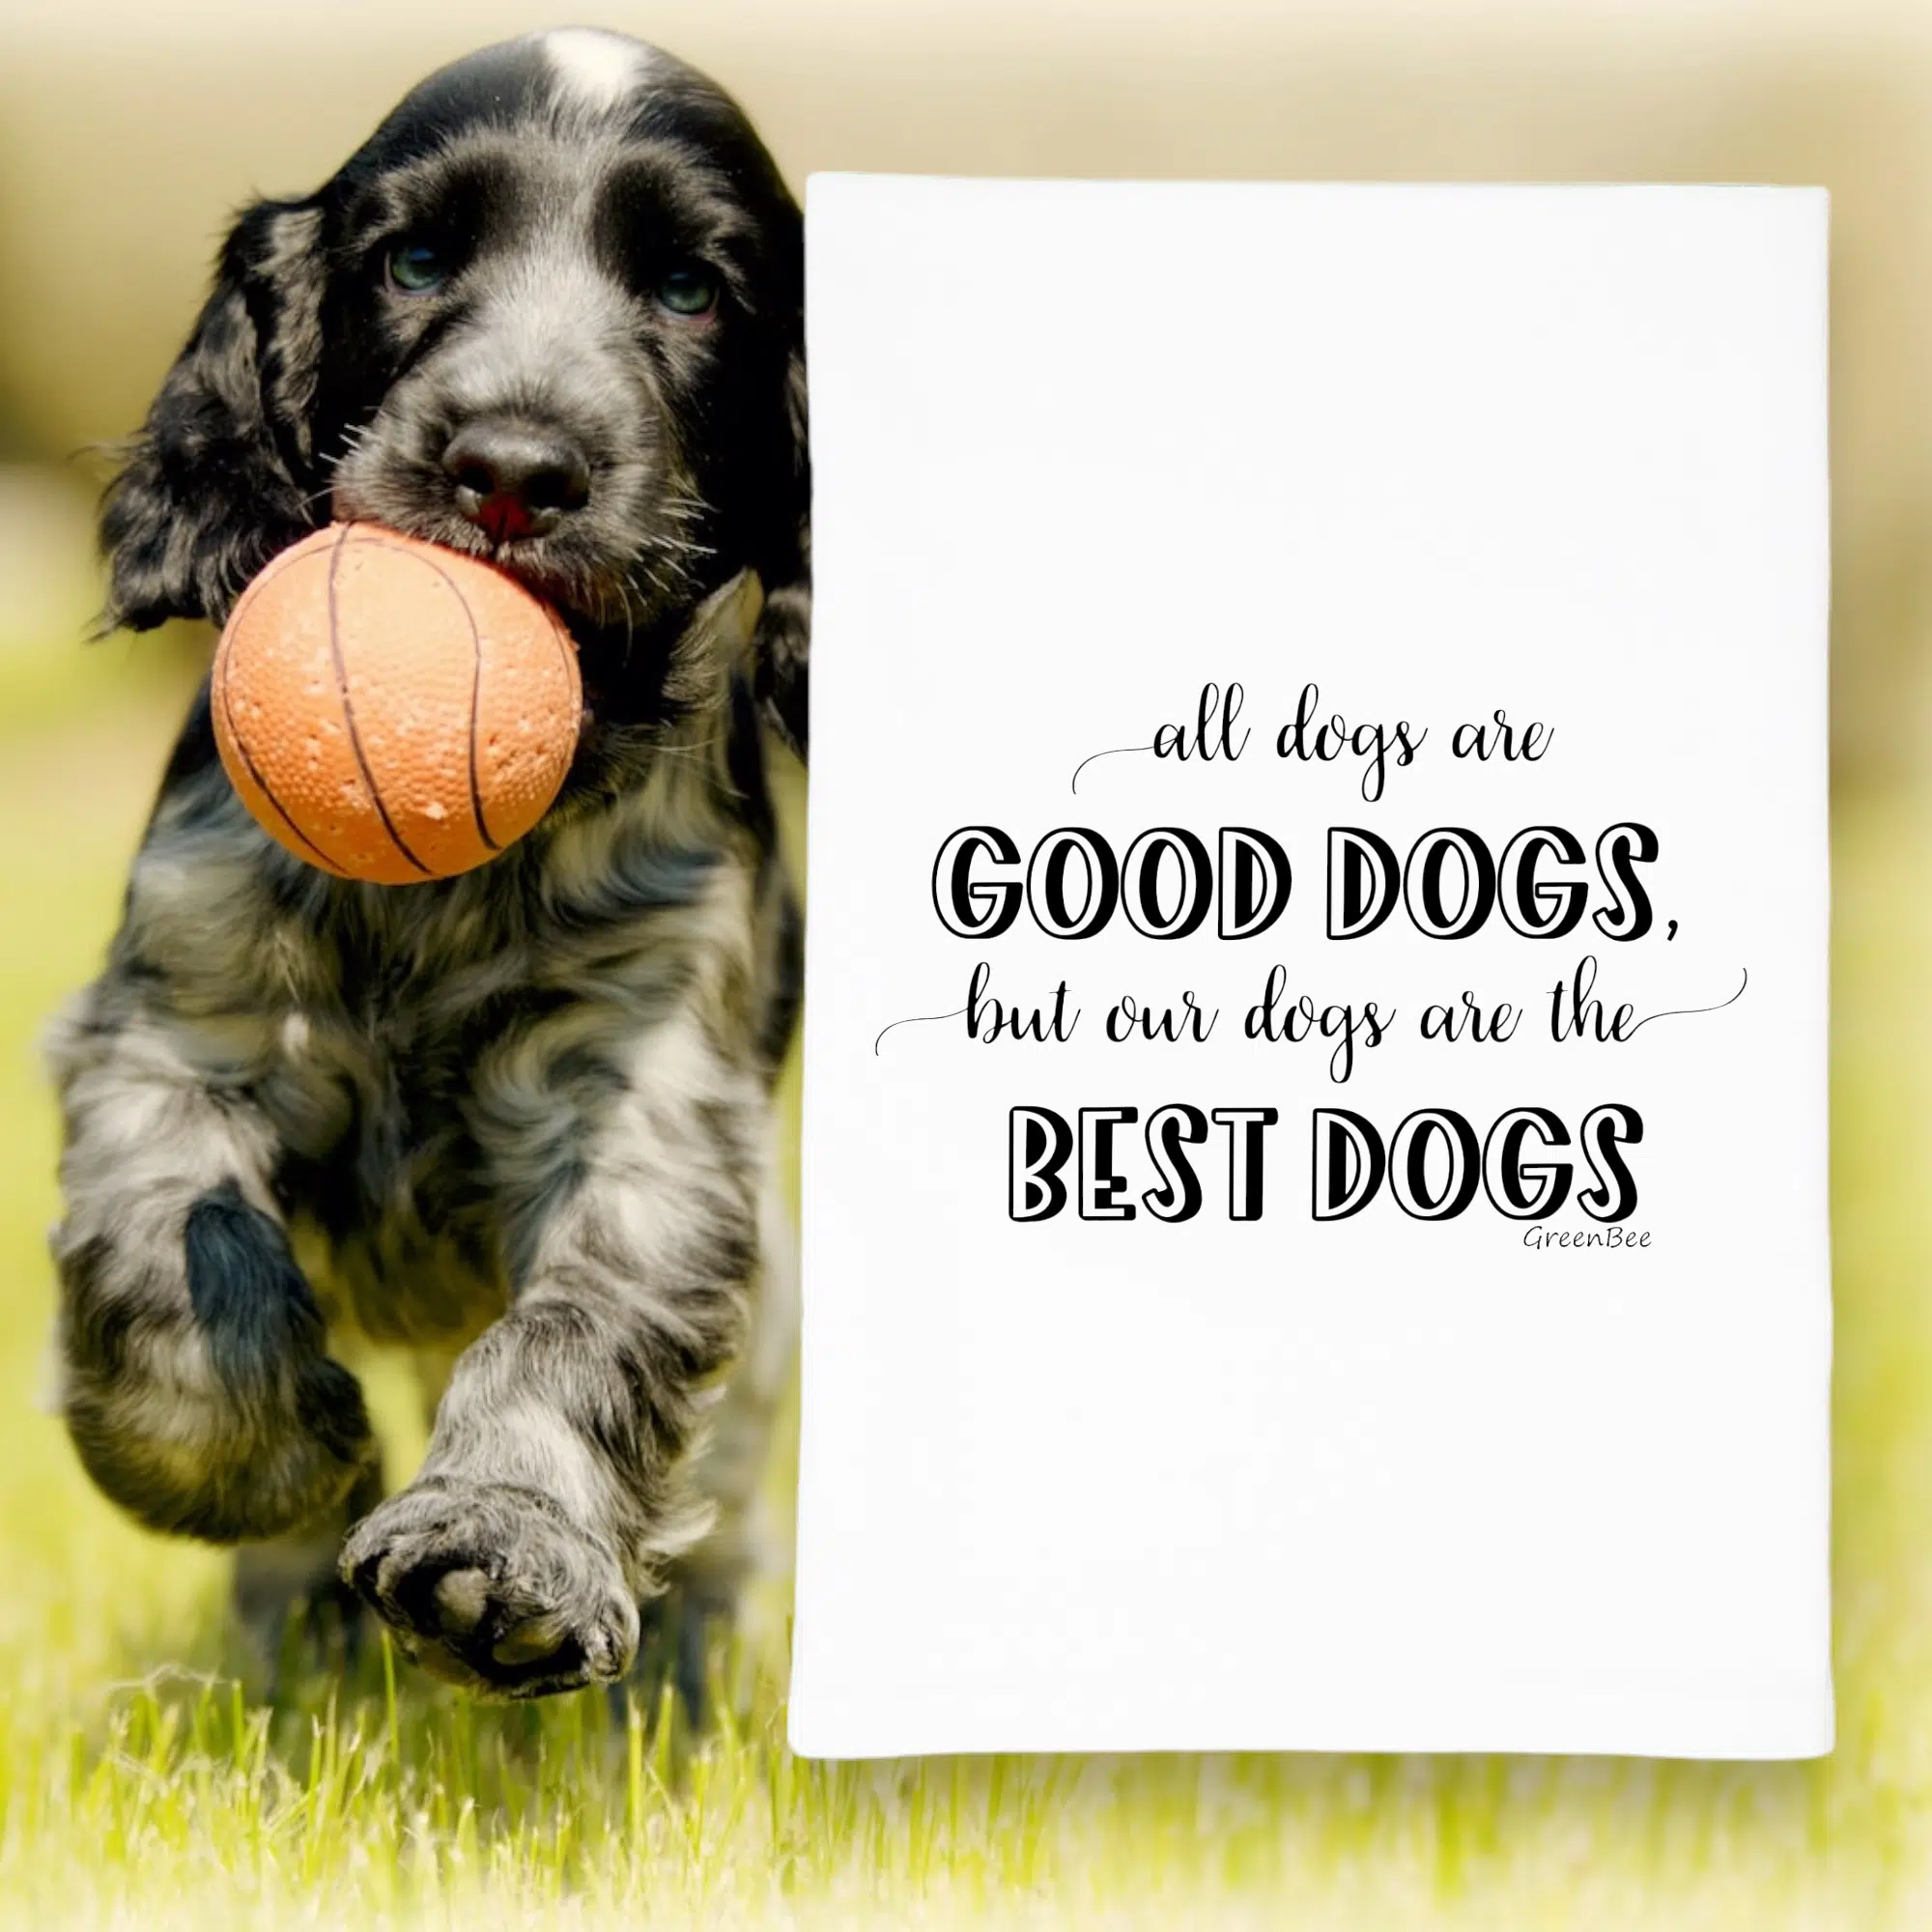 All dogs are good dogs, but our dogs are the best dogs, tea towel, flour sack kitchen towel